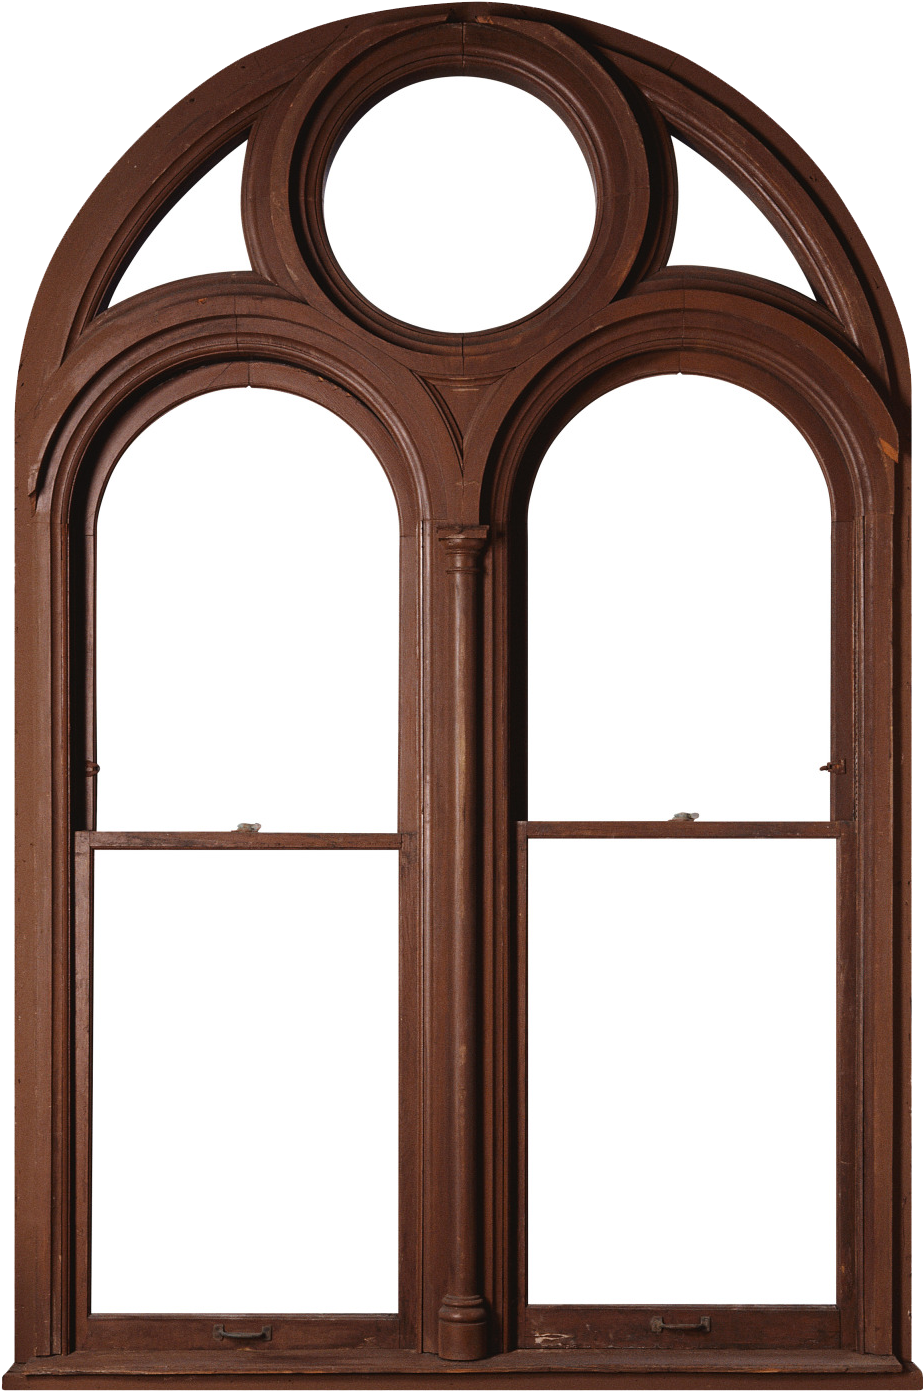 Arched Wooden Window Frame PNG image